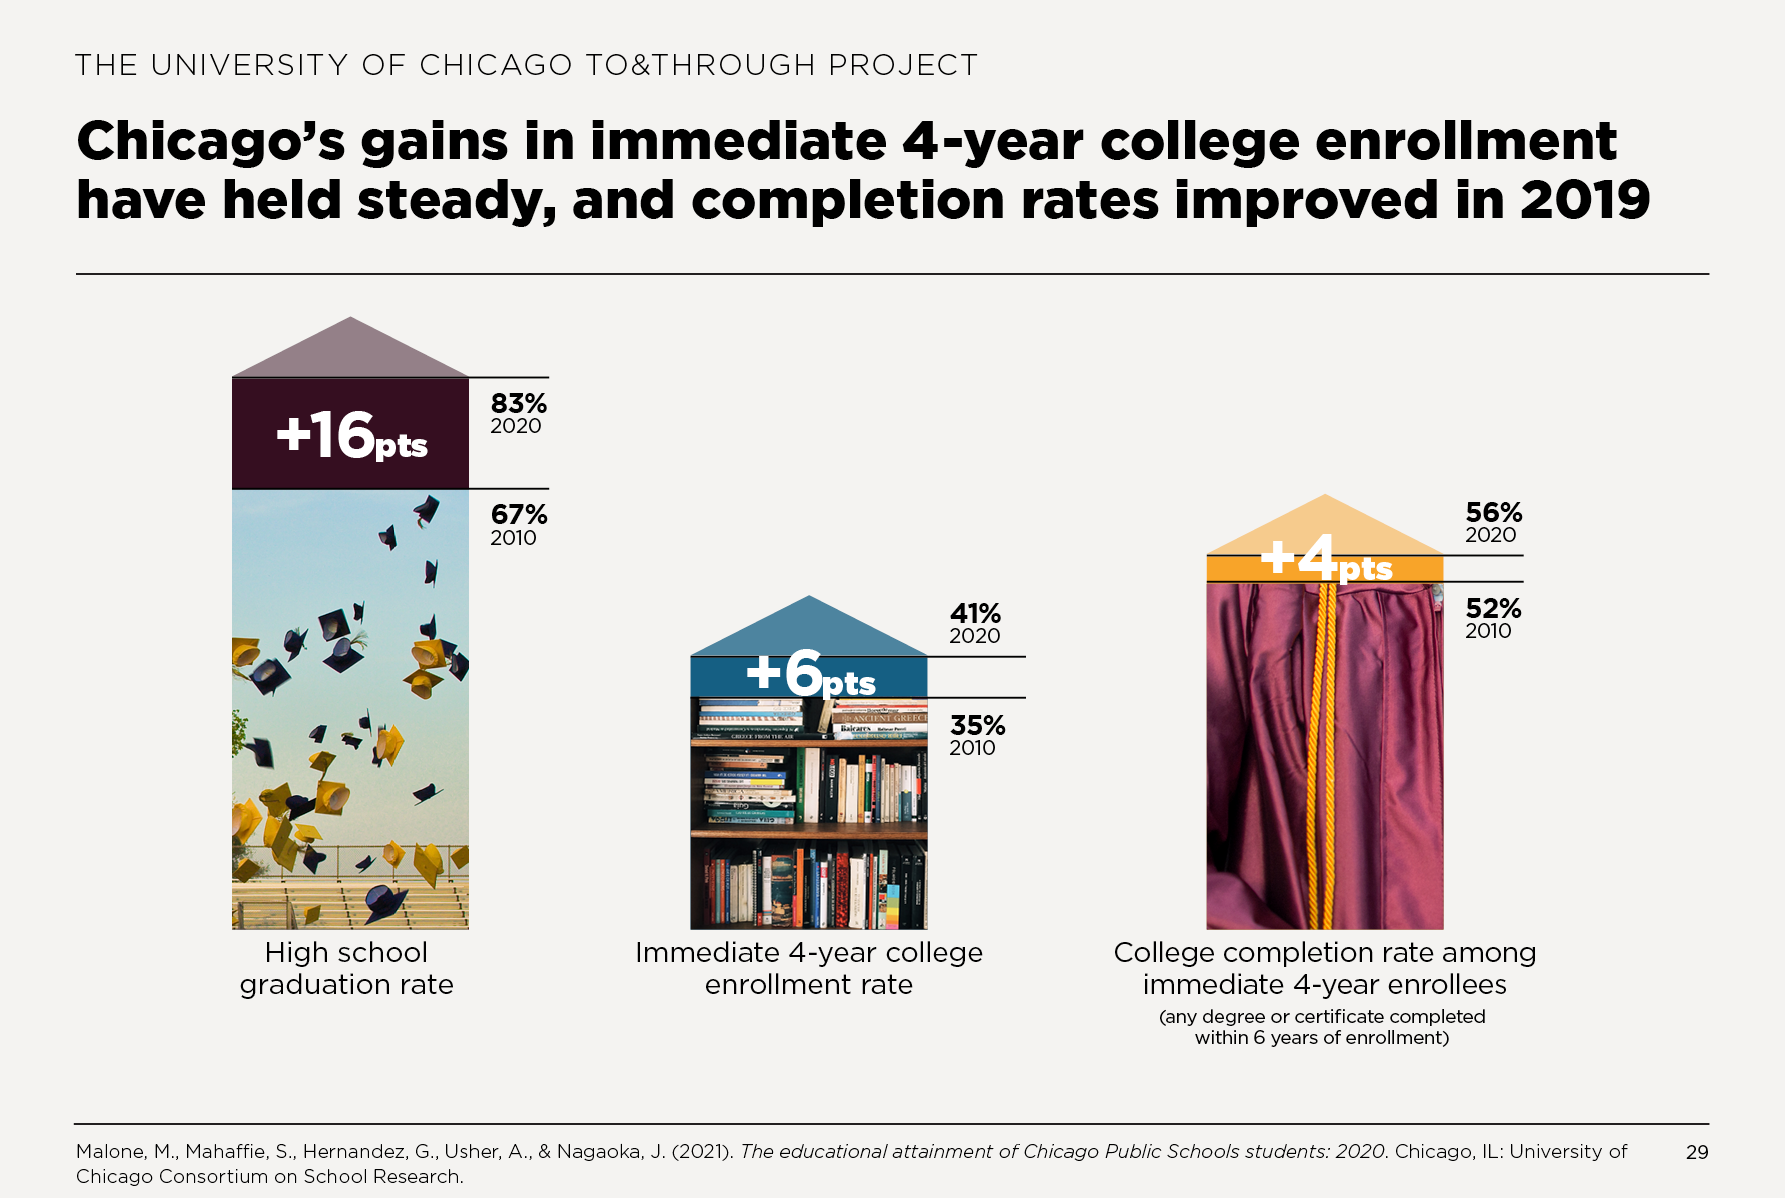 Chicago’s gains in immediate 4-year college enrollment have held steady, and completion rates improved in 2019